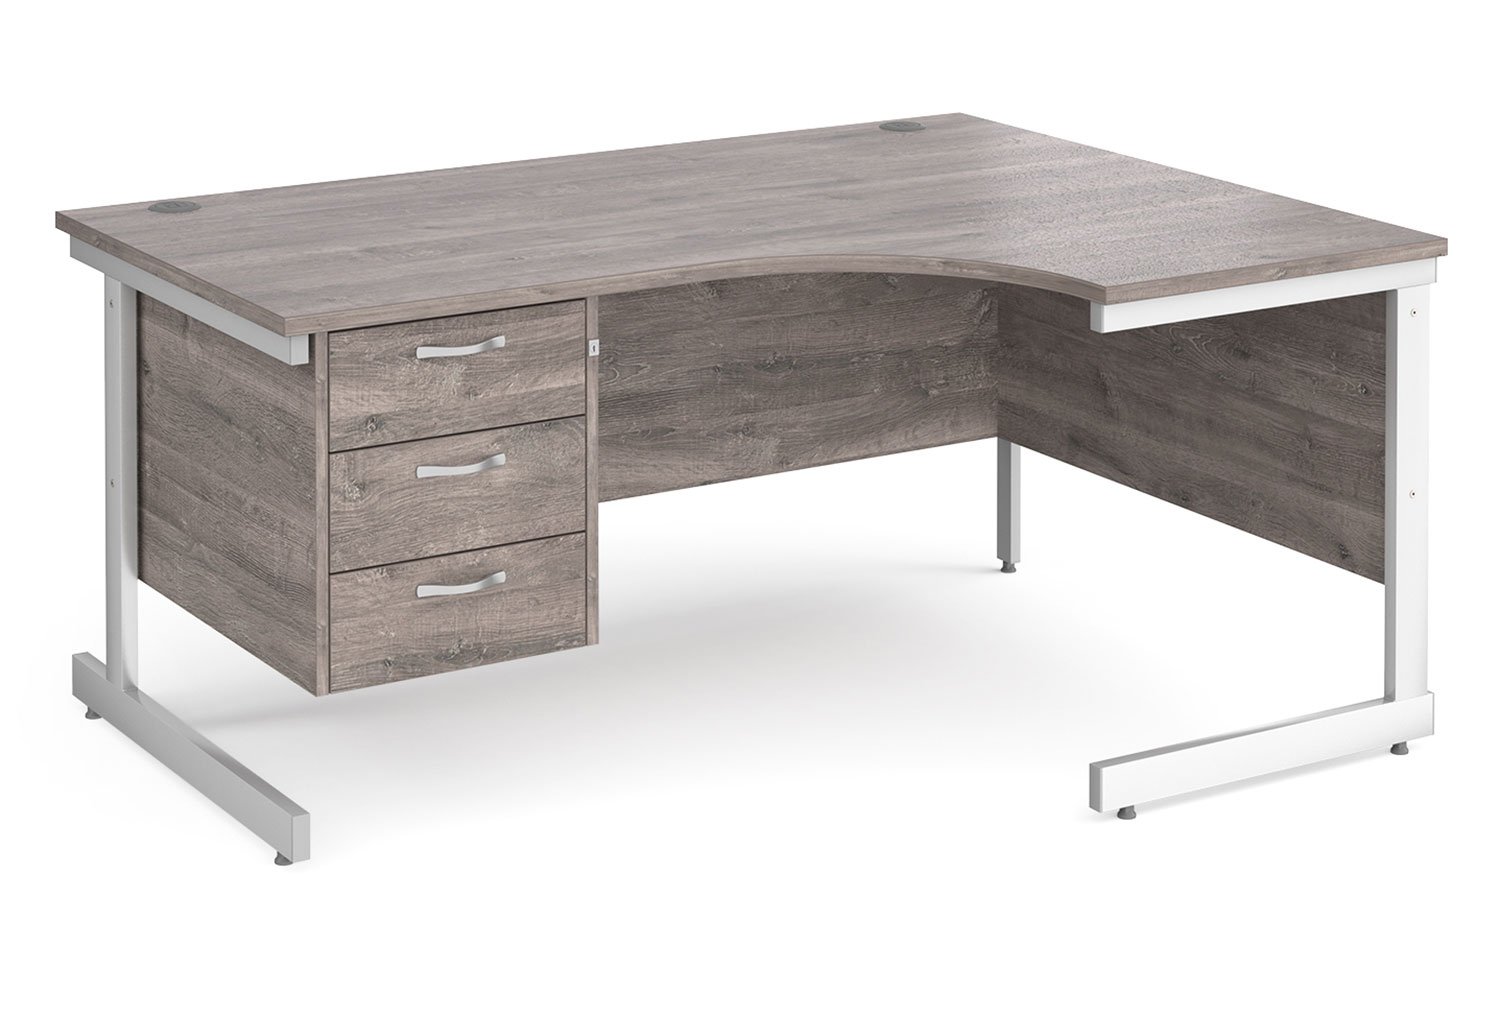 Thrifty Next-Day Right Hand Ergonomic Office Desk 3 Drawers Grey Oak, 160wx120/80dx73h (cm), Express Delivery